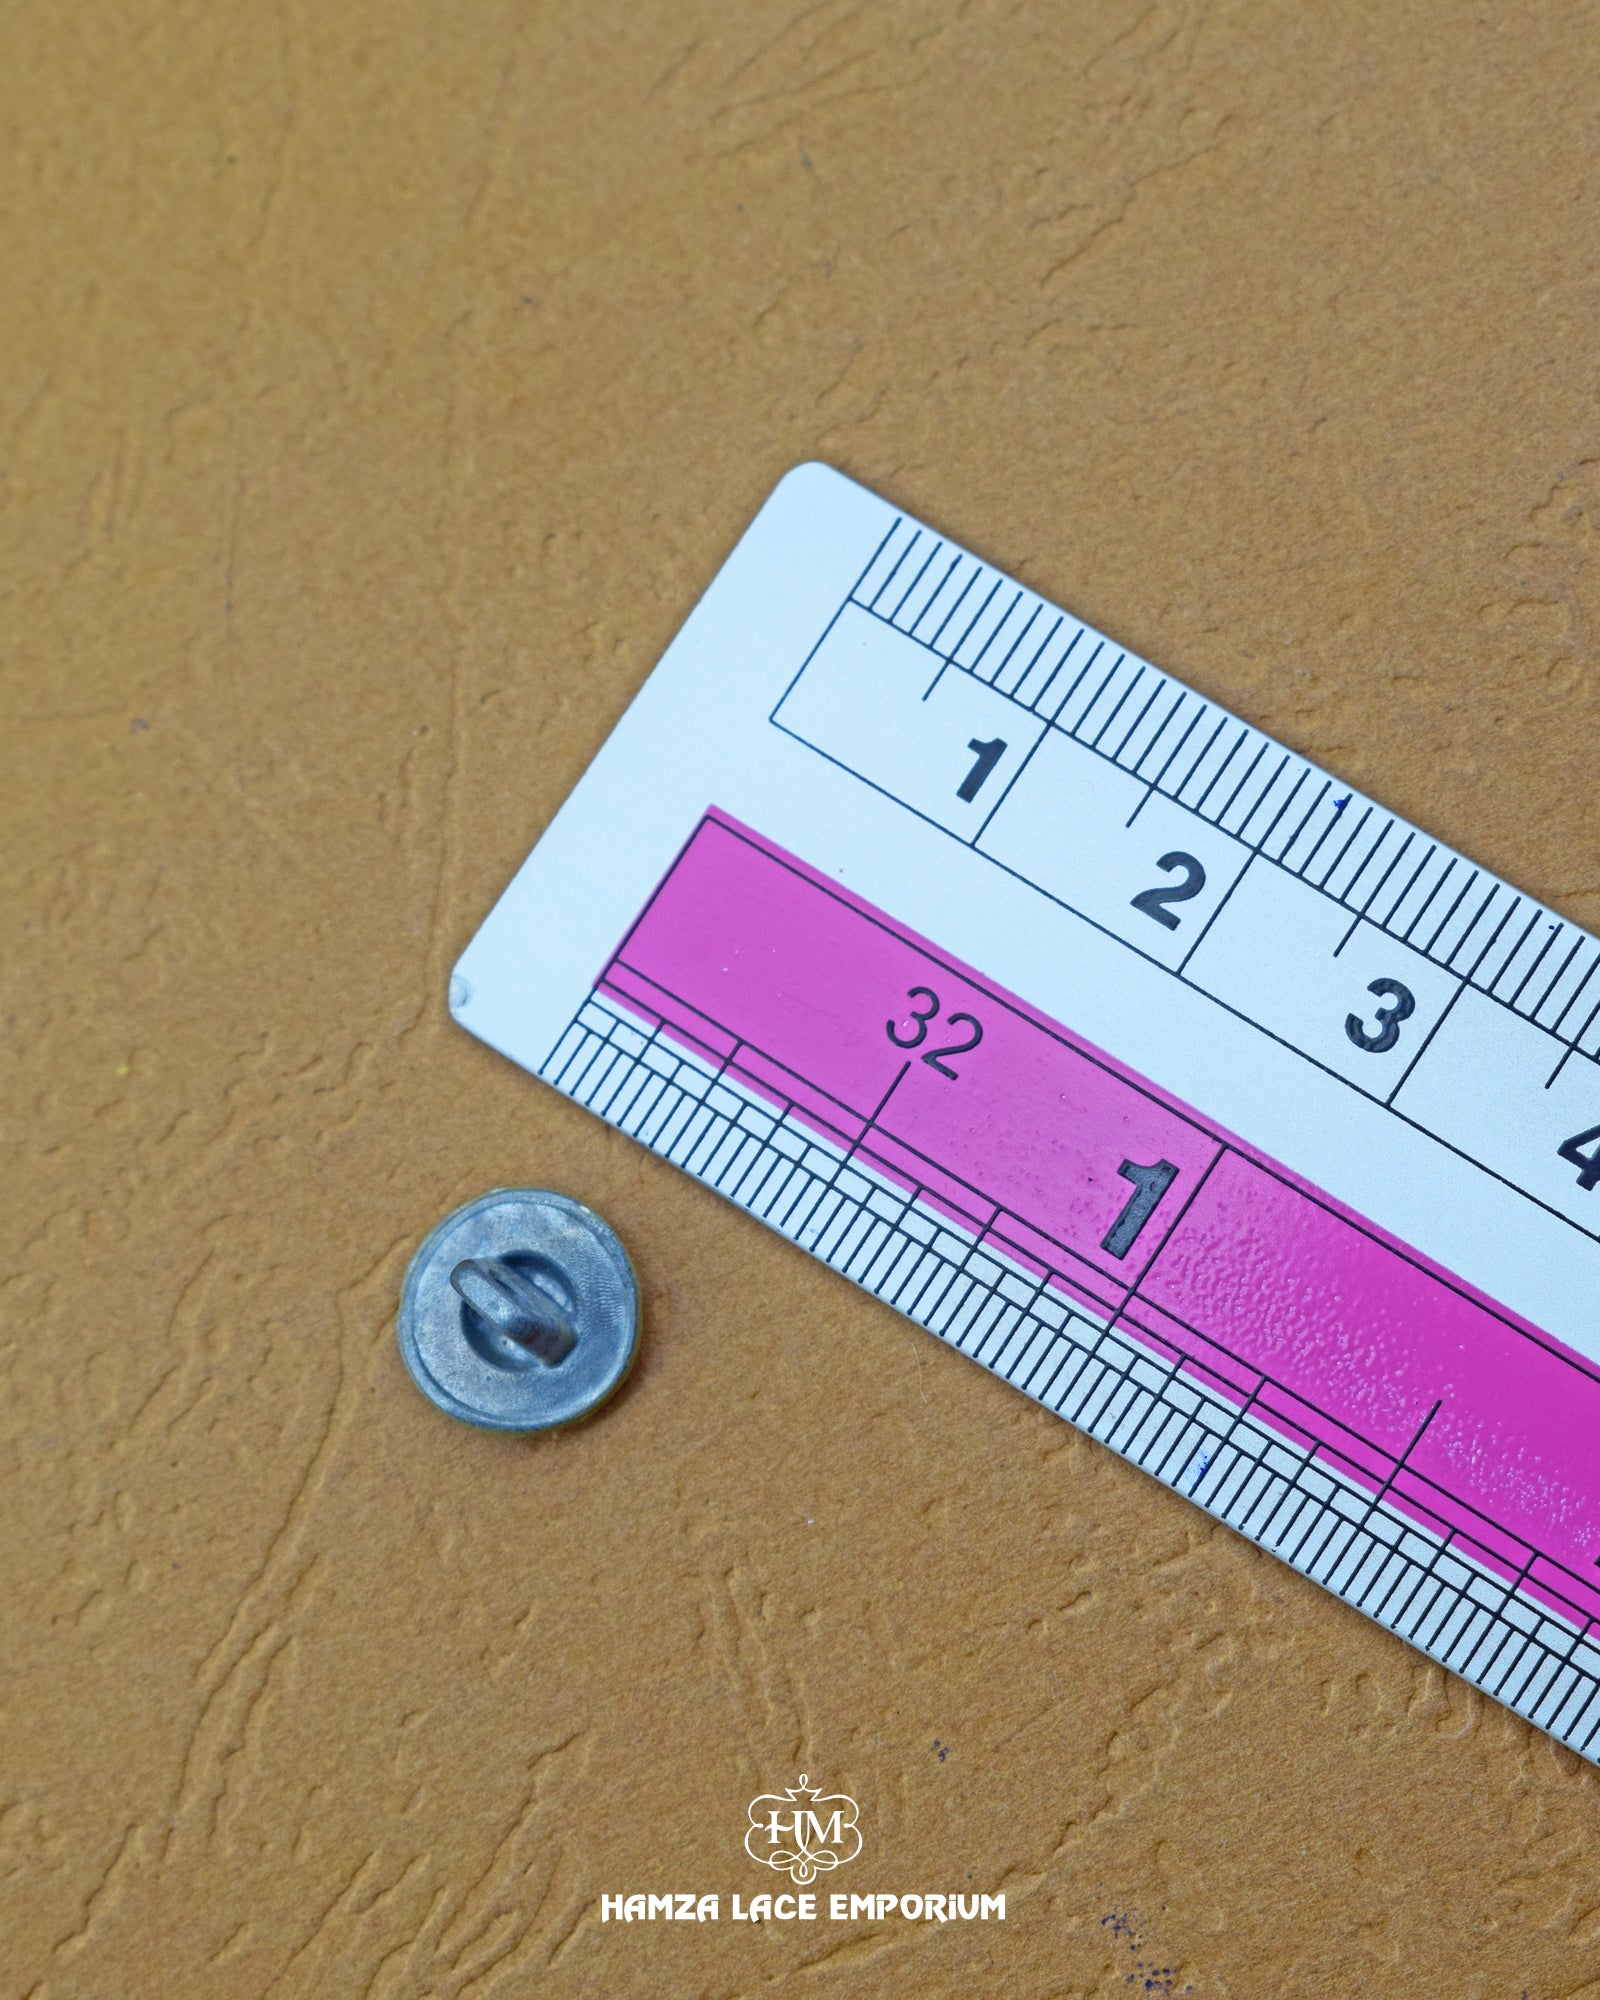 Size of the 'Loop Shape Metal Button MB2' is given with the help of a ruler